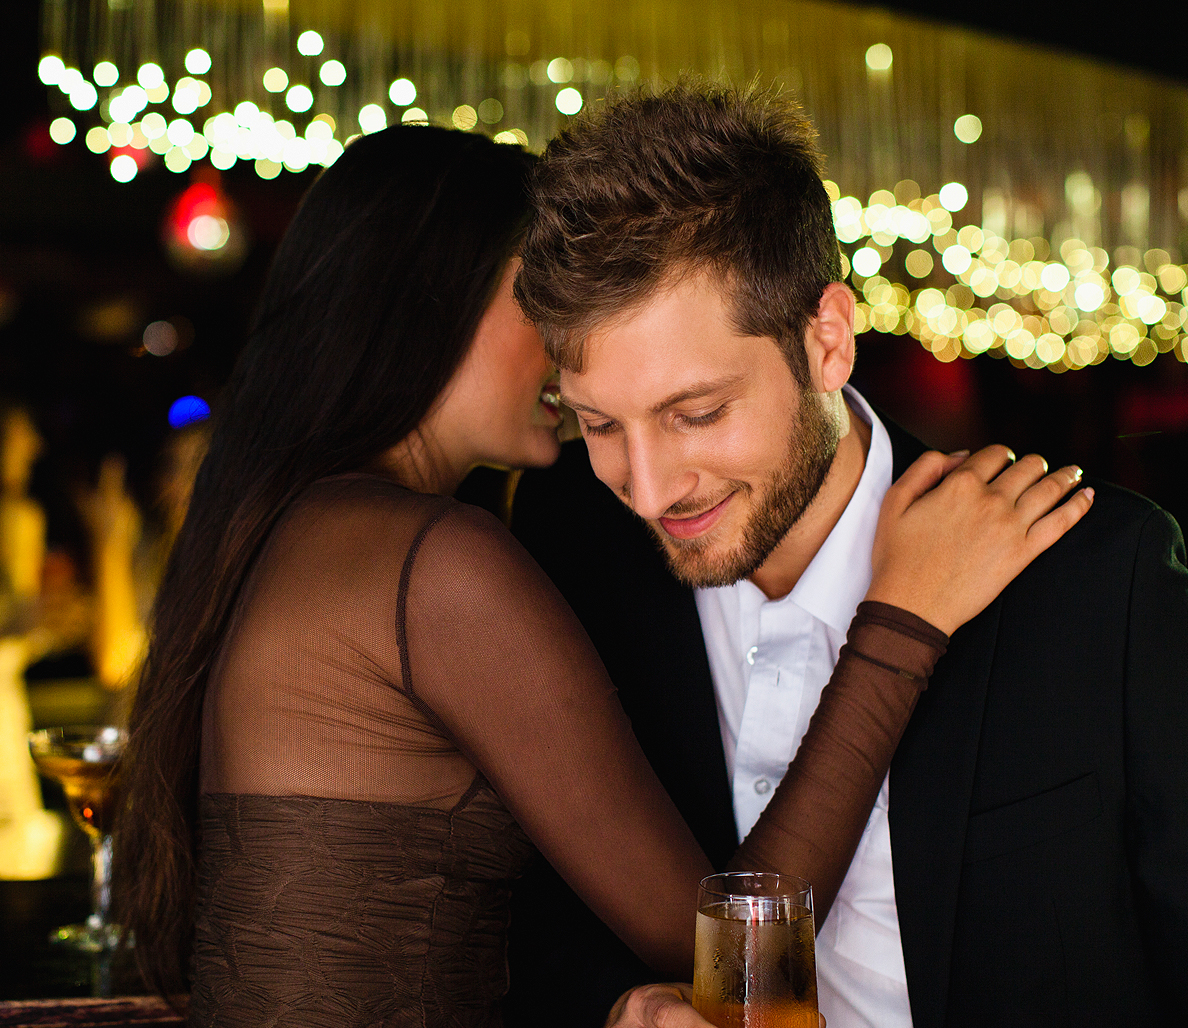 Best Dating Sites For Women In Their 30s